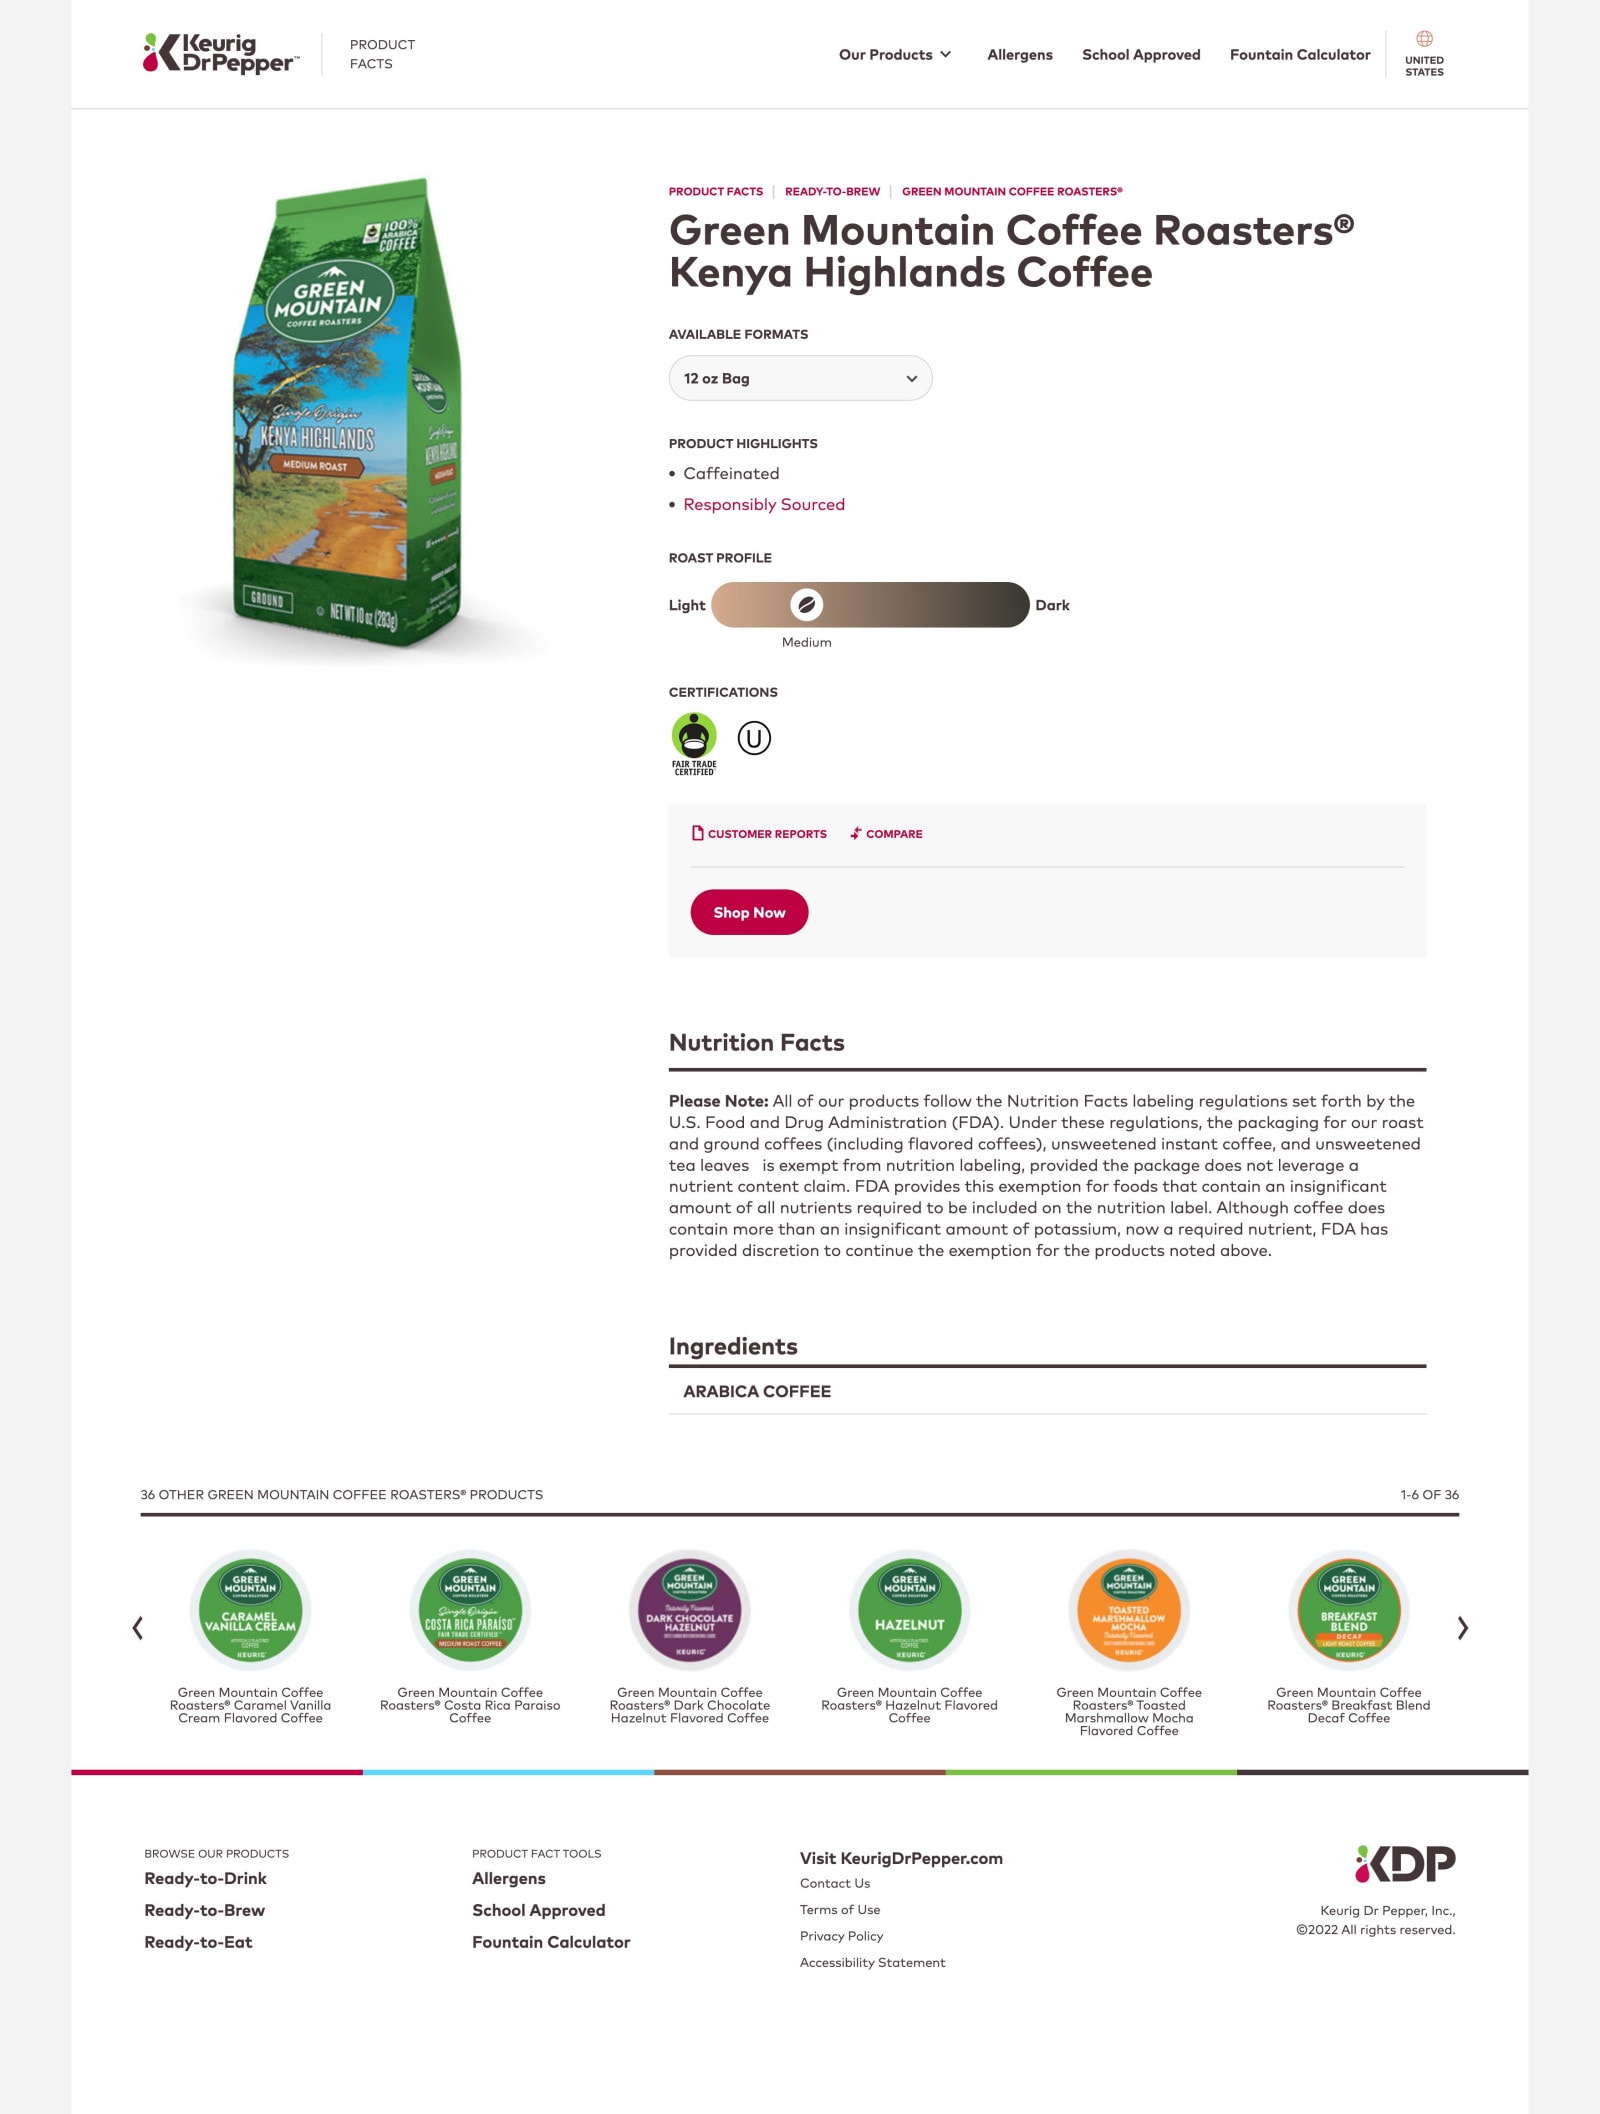 ready-to-brew product detail page